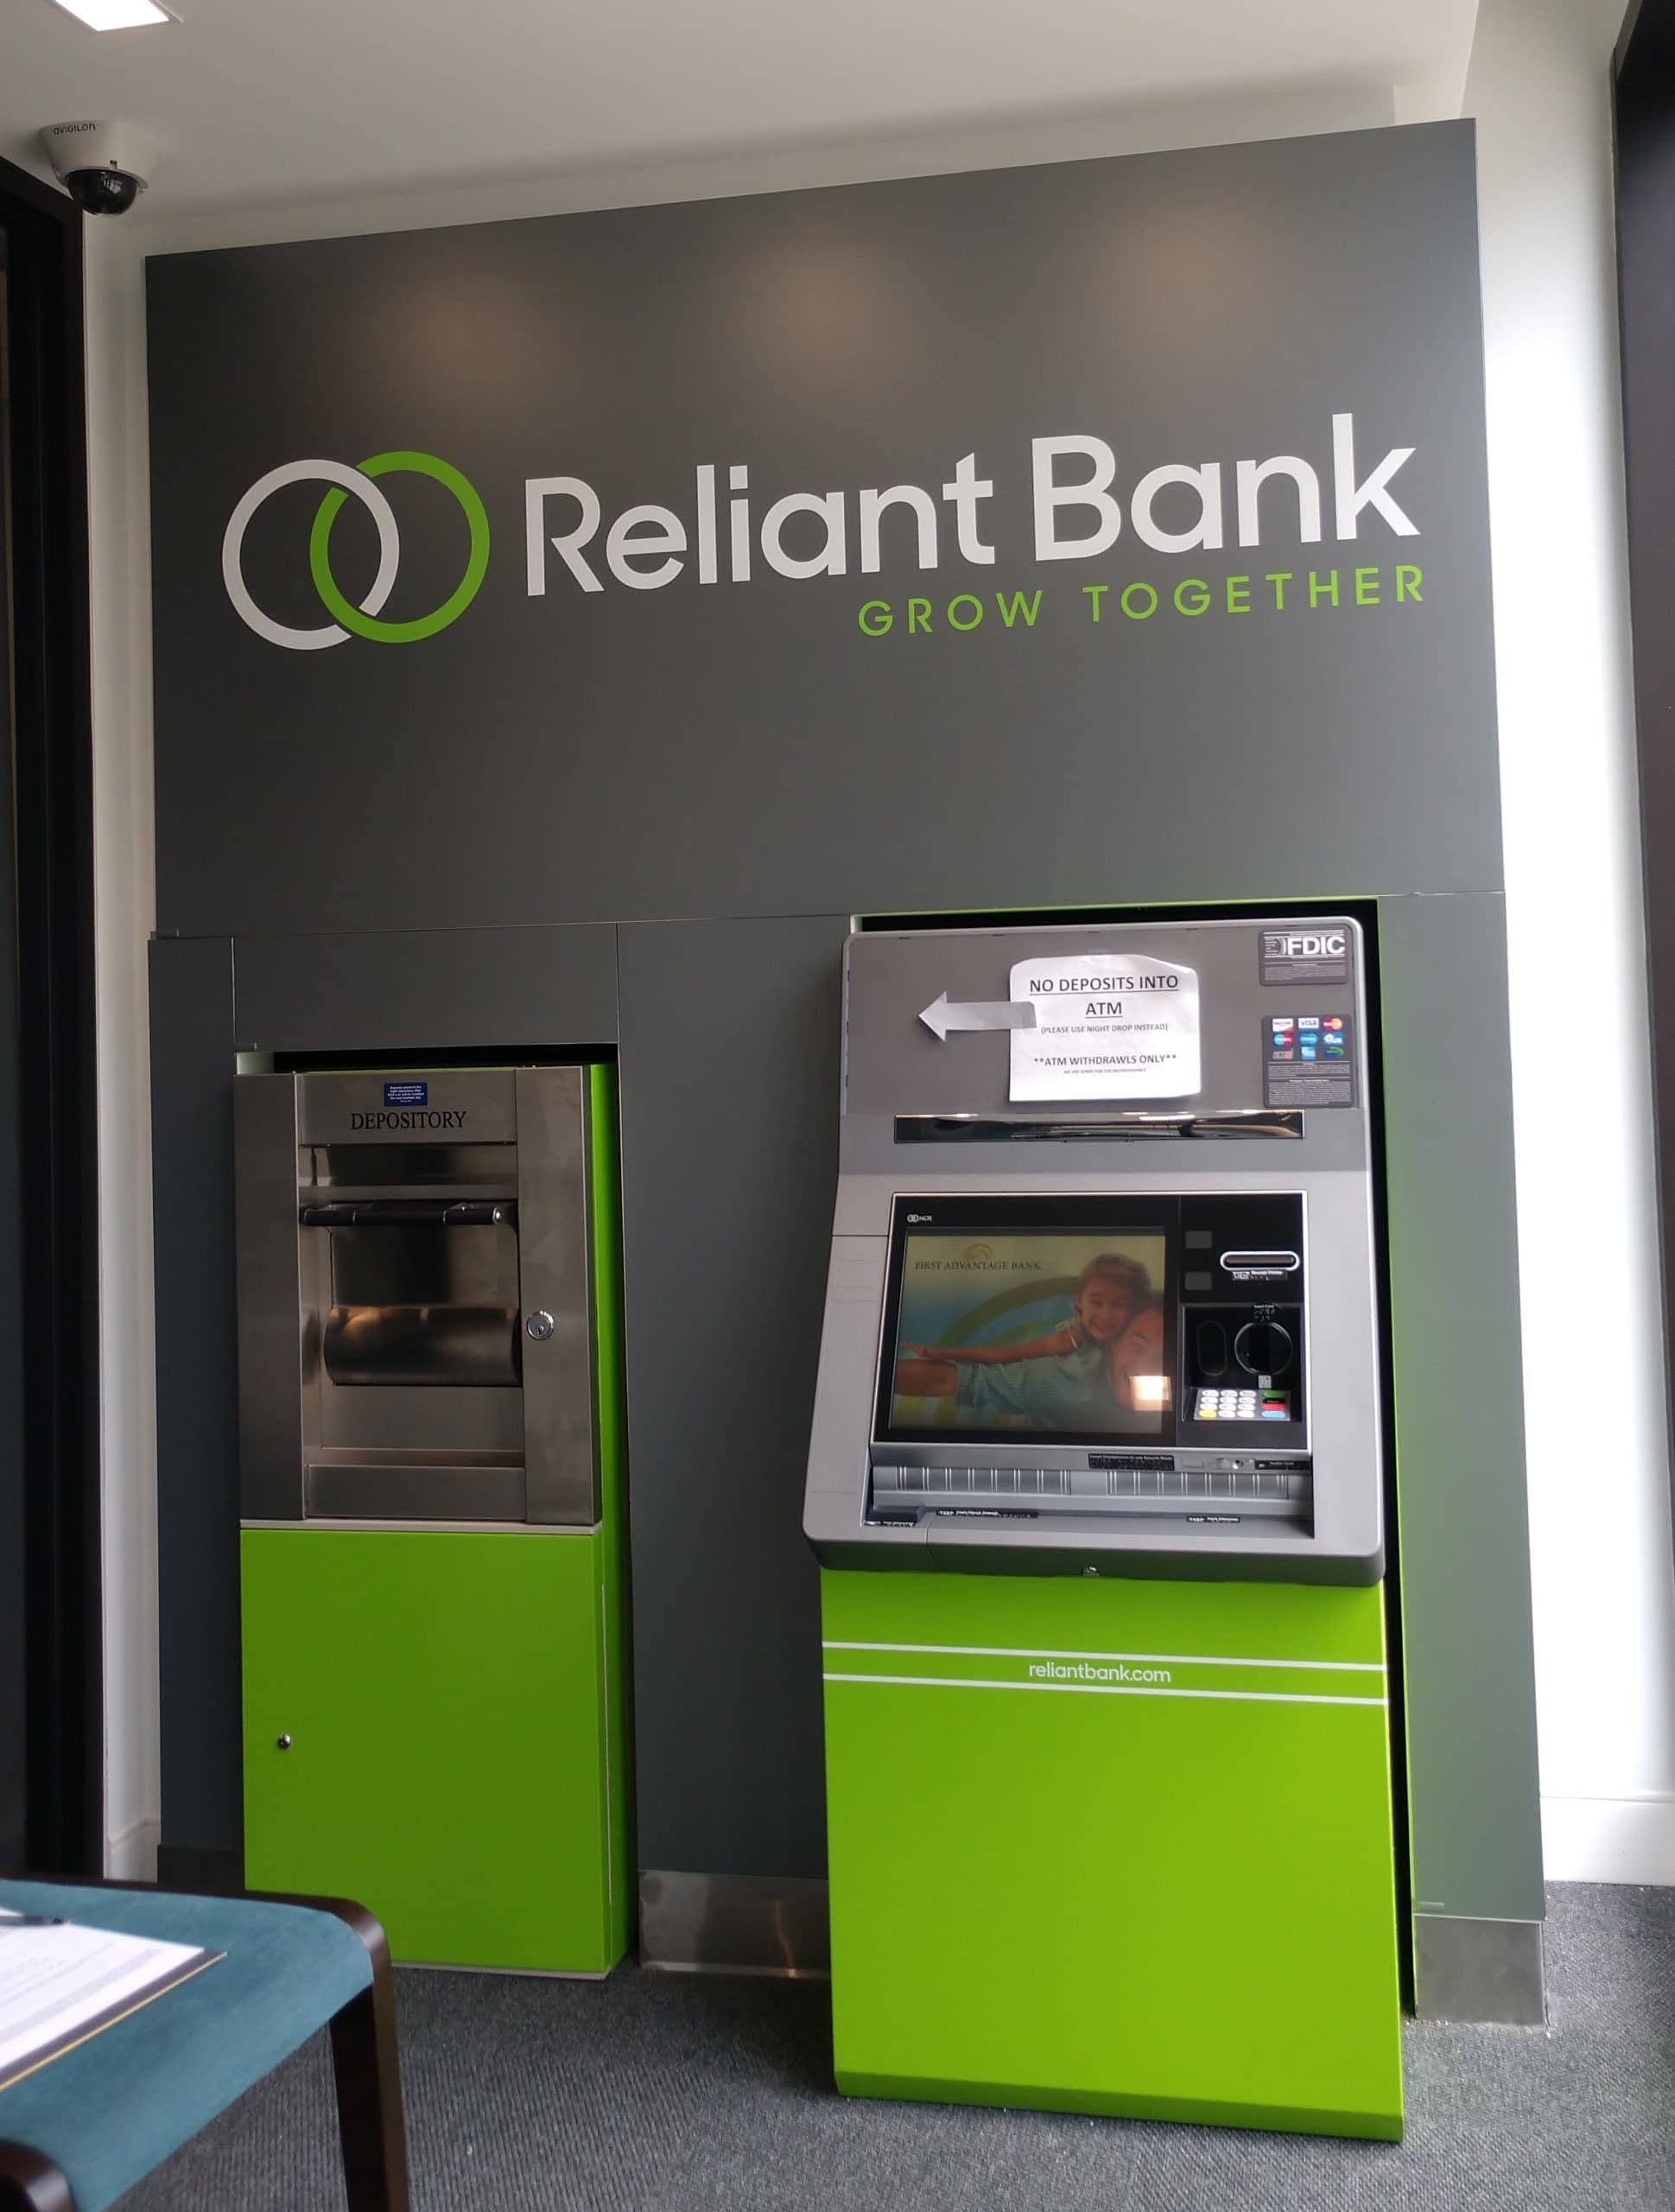 Custom Graphics for Reliant Bank's ATMs installed by 12-Point SignWorks